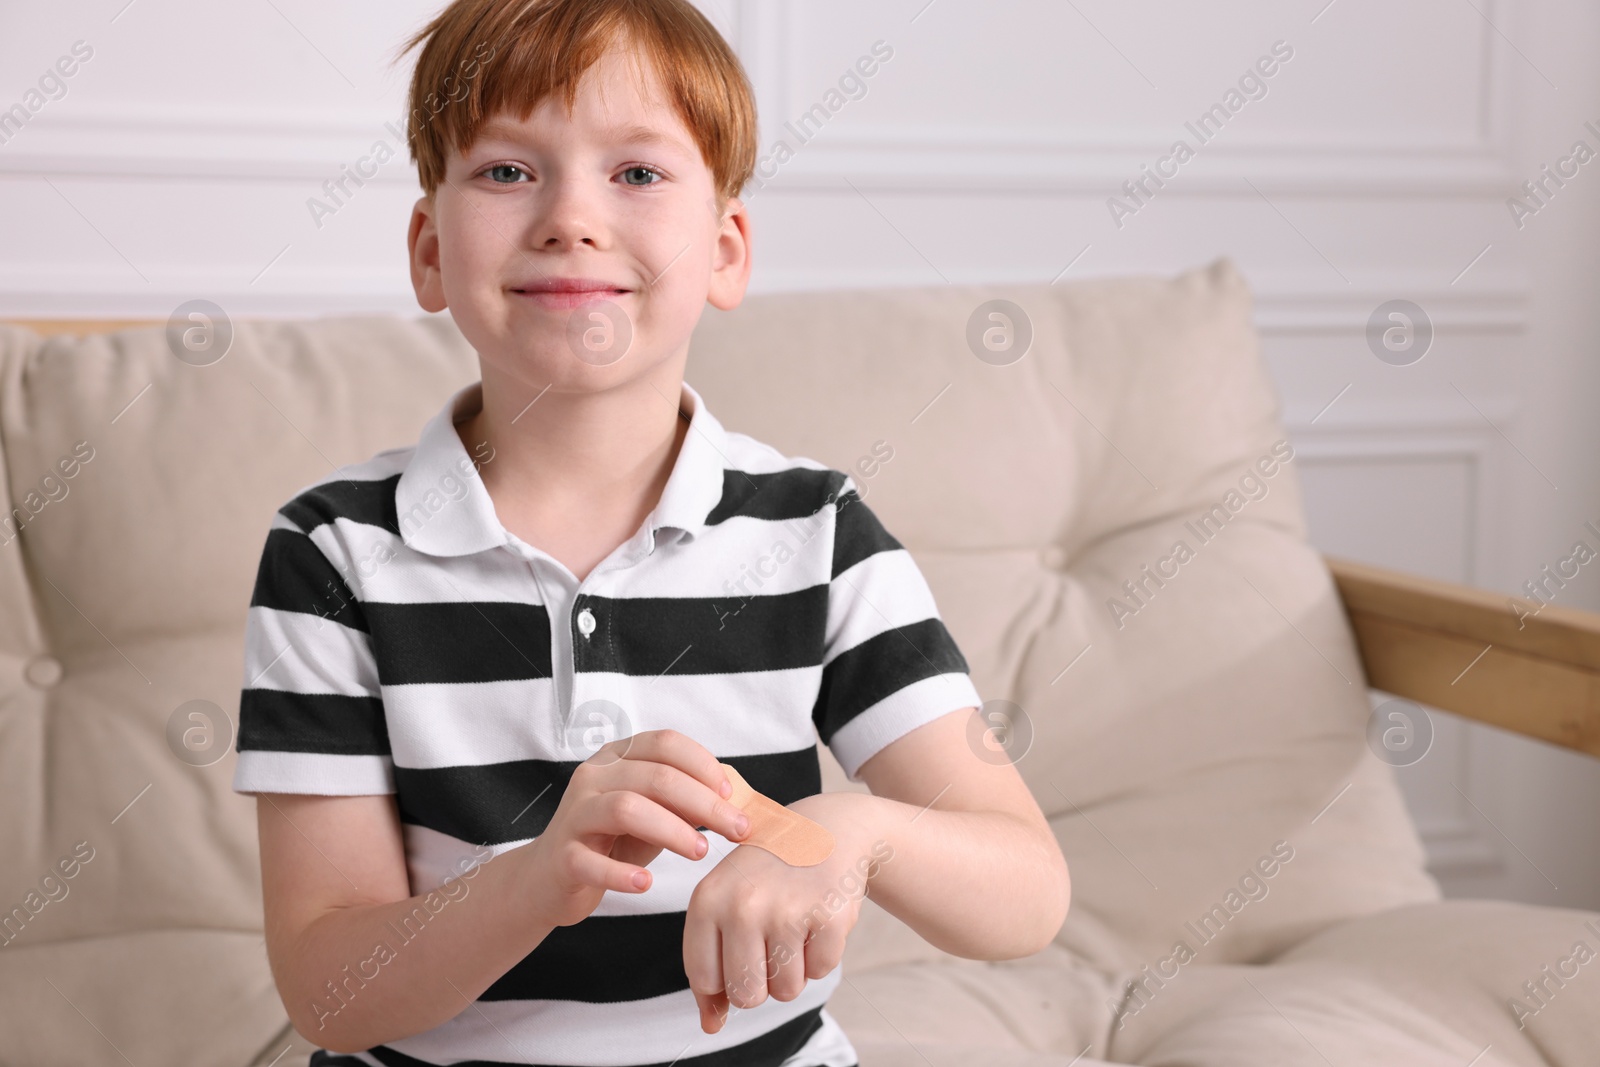 Photo of Little boy putting sticking plaster onto hand on sofa indoors. Space for text